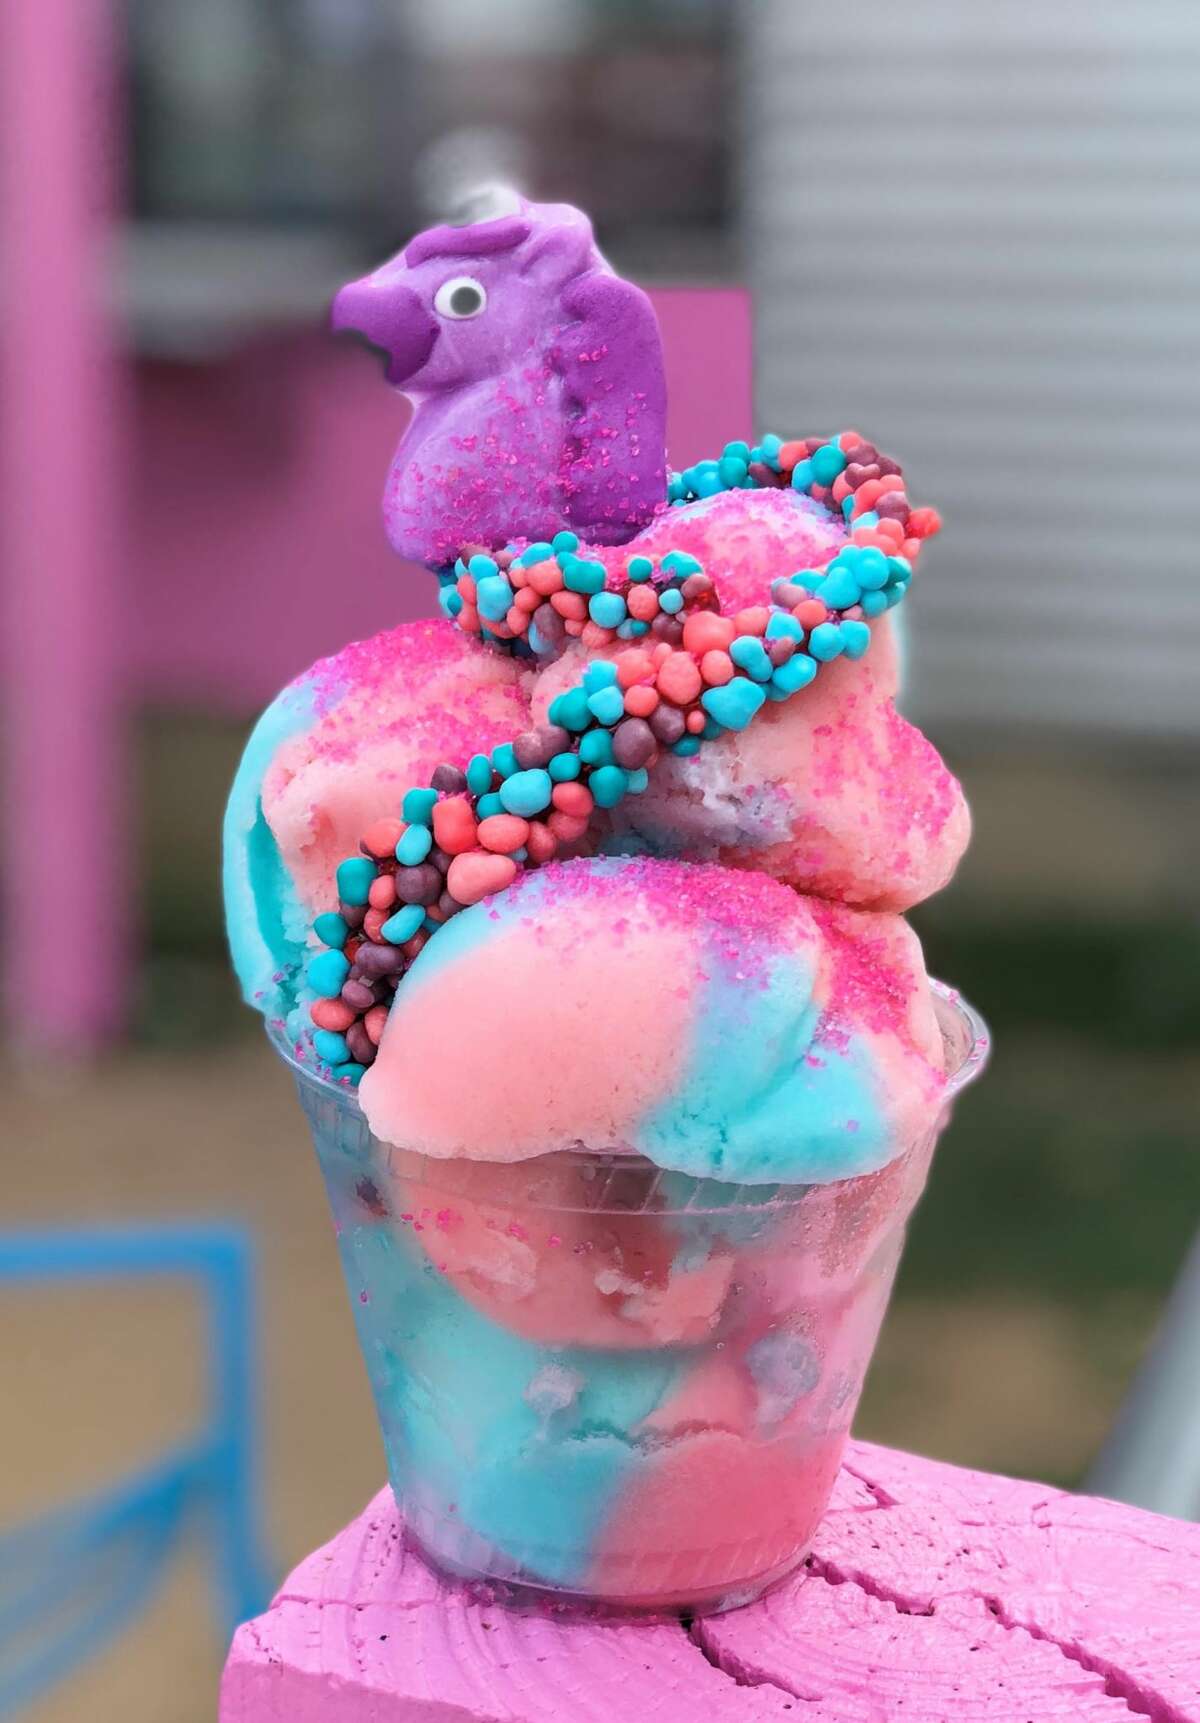 Big Daddy's will be selling a raspa named Russ PARANOID Treat. Featuring orange smooth ice + gummy peach rings + Nerds candy rope + orange candies + a candy eye